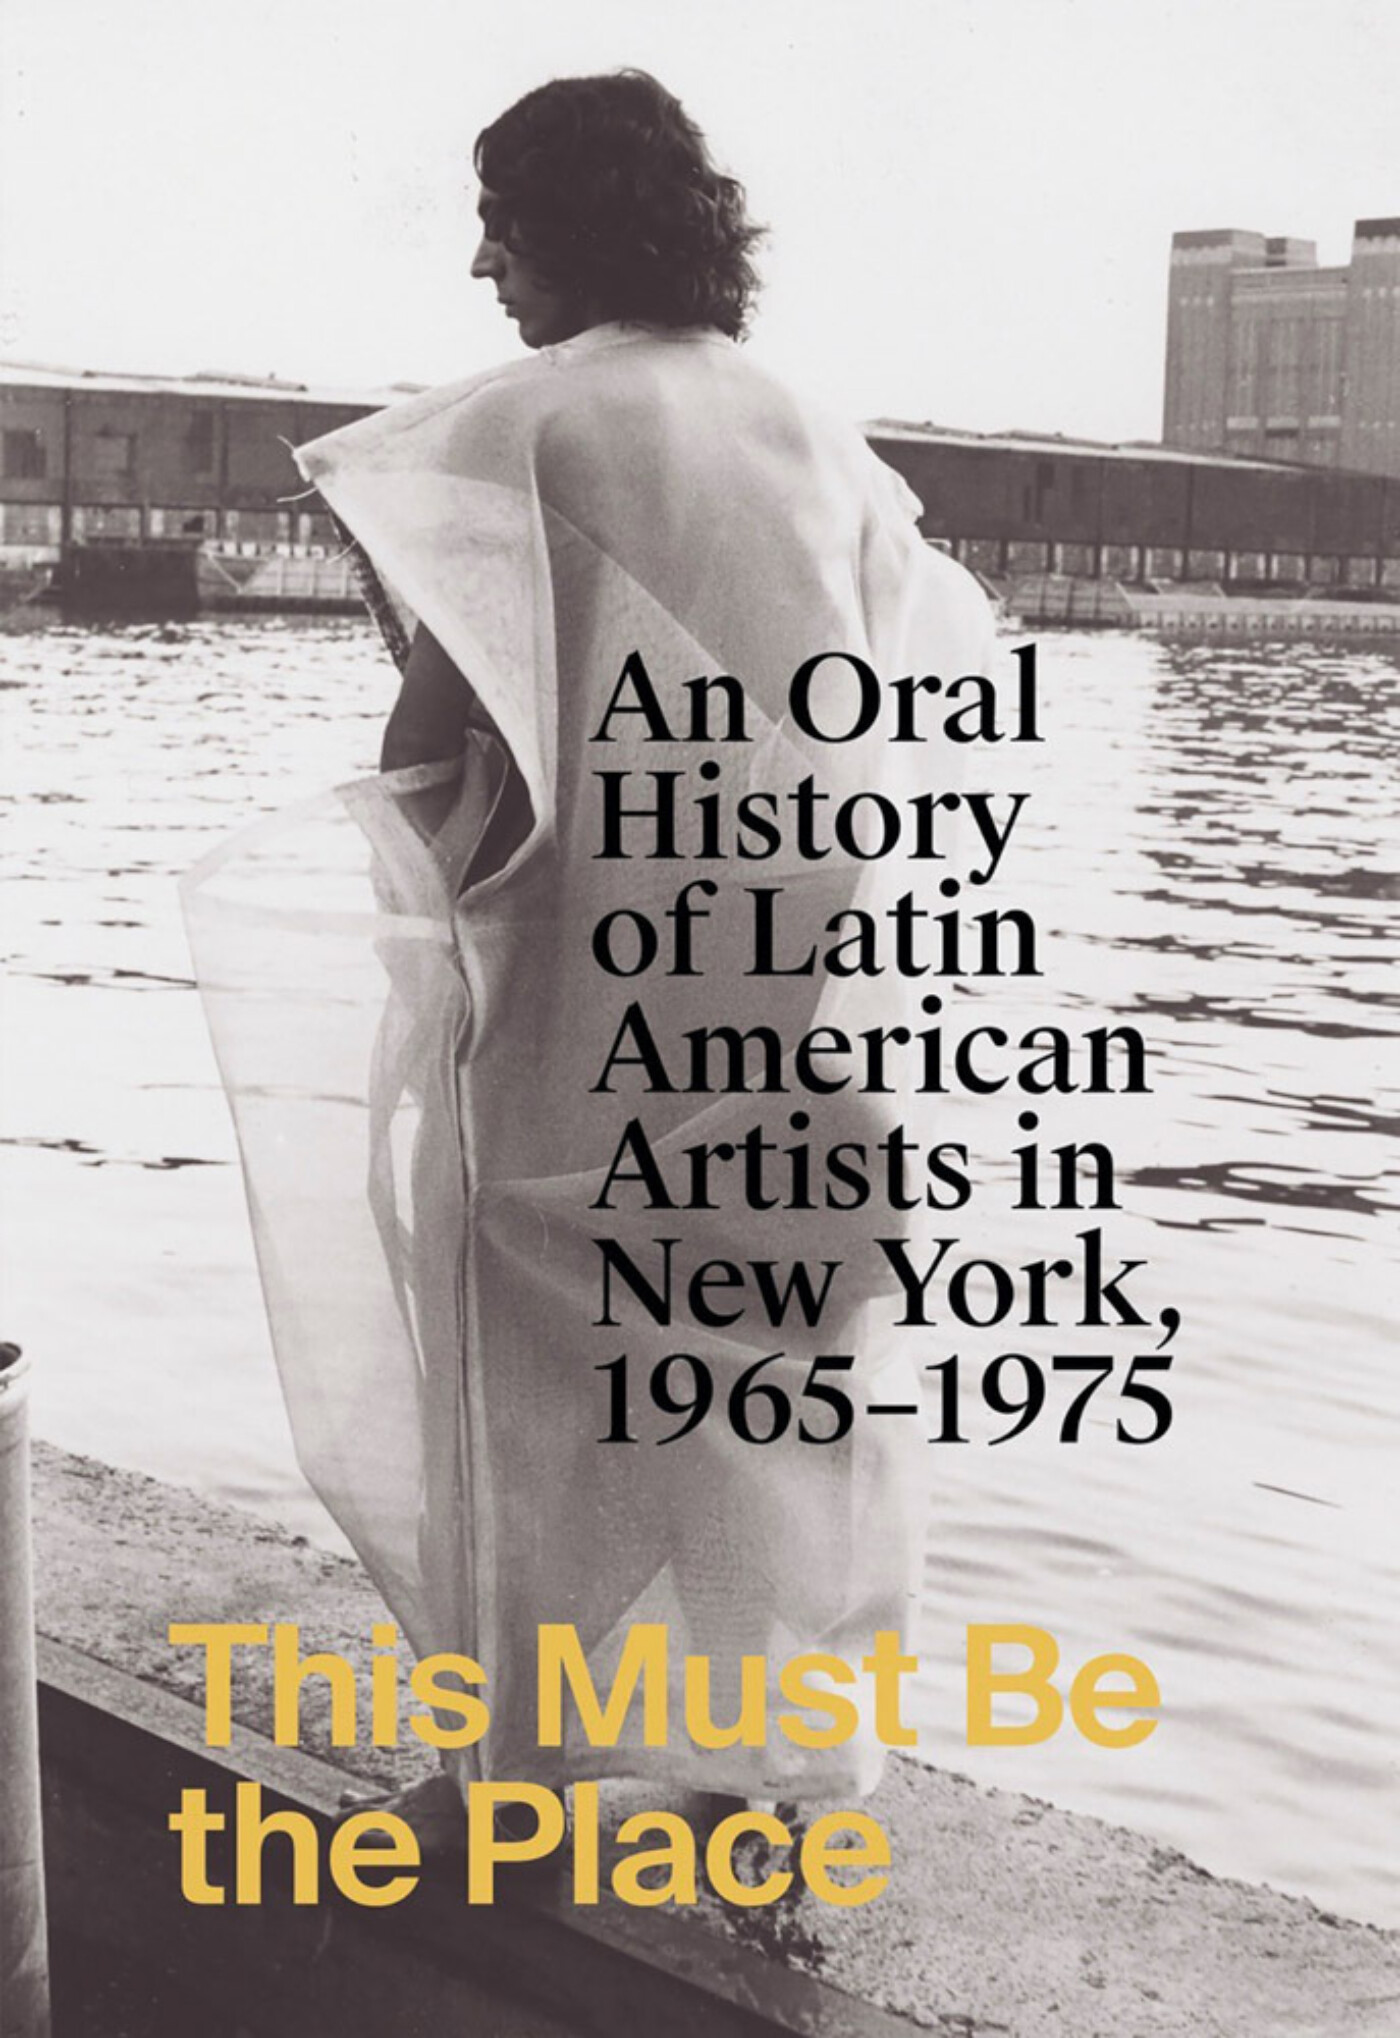 Cover image including typography of the book's title, along with a full-bleed image of an Helio Oiticica work from 1972. The photograph features a figure standing barefoot at the New York Chelsea Piers, wearing one of Oiticica's "parangole," tactile artworks meant to be activated by their wearer.